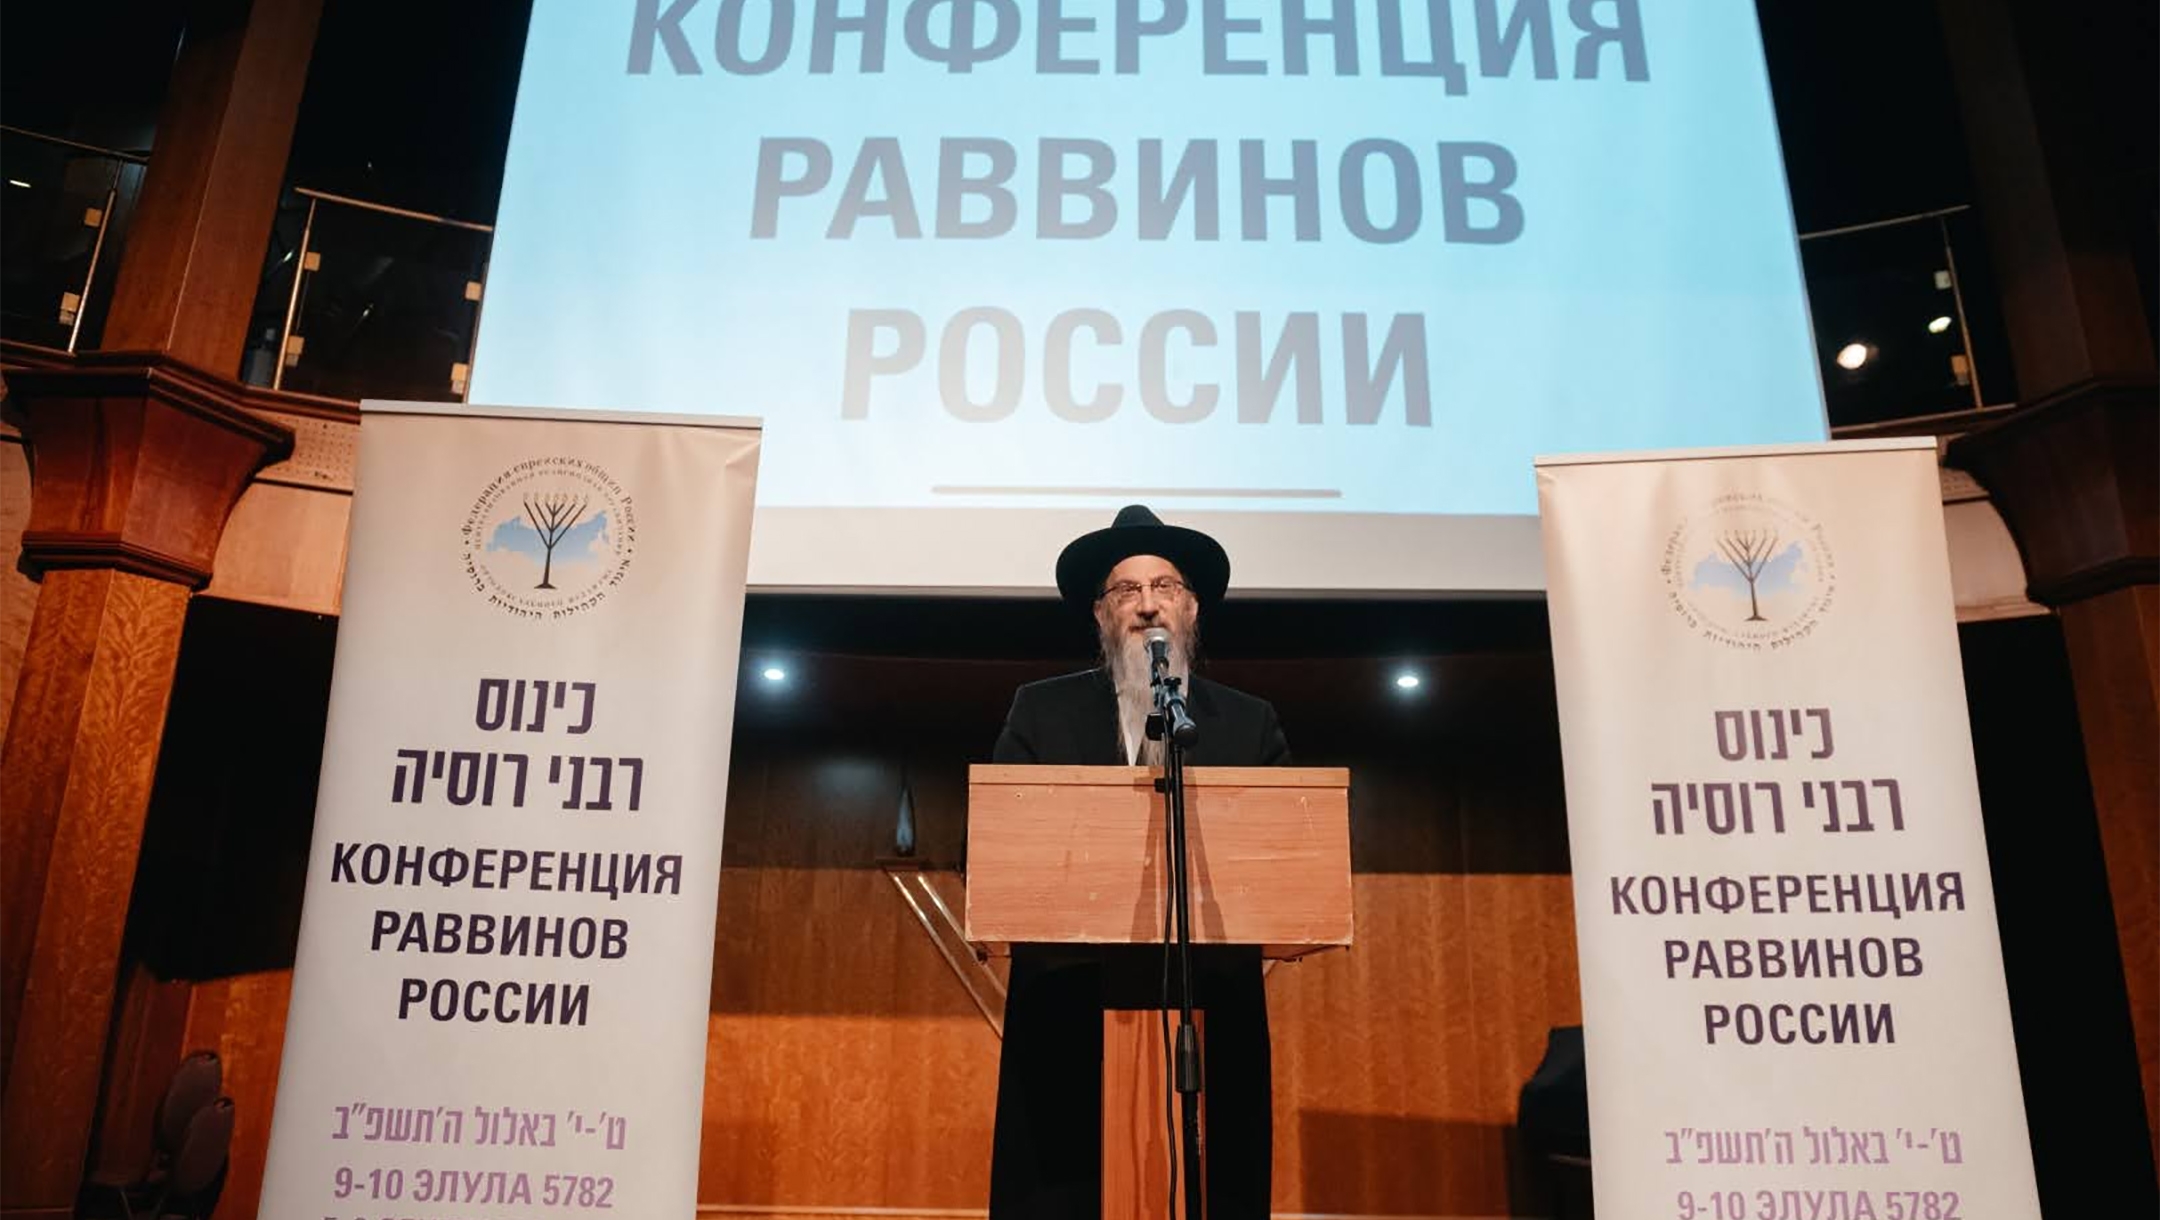 Russian Chief Rabbi Berel Lazar delivers a speech during an emergency gathering of rabbis in Moscow, Russia, Sept. 5, 2022. (Courtesy of the Federation of Jewish Communities of Russia)